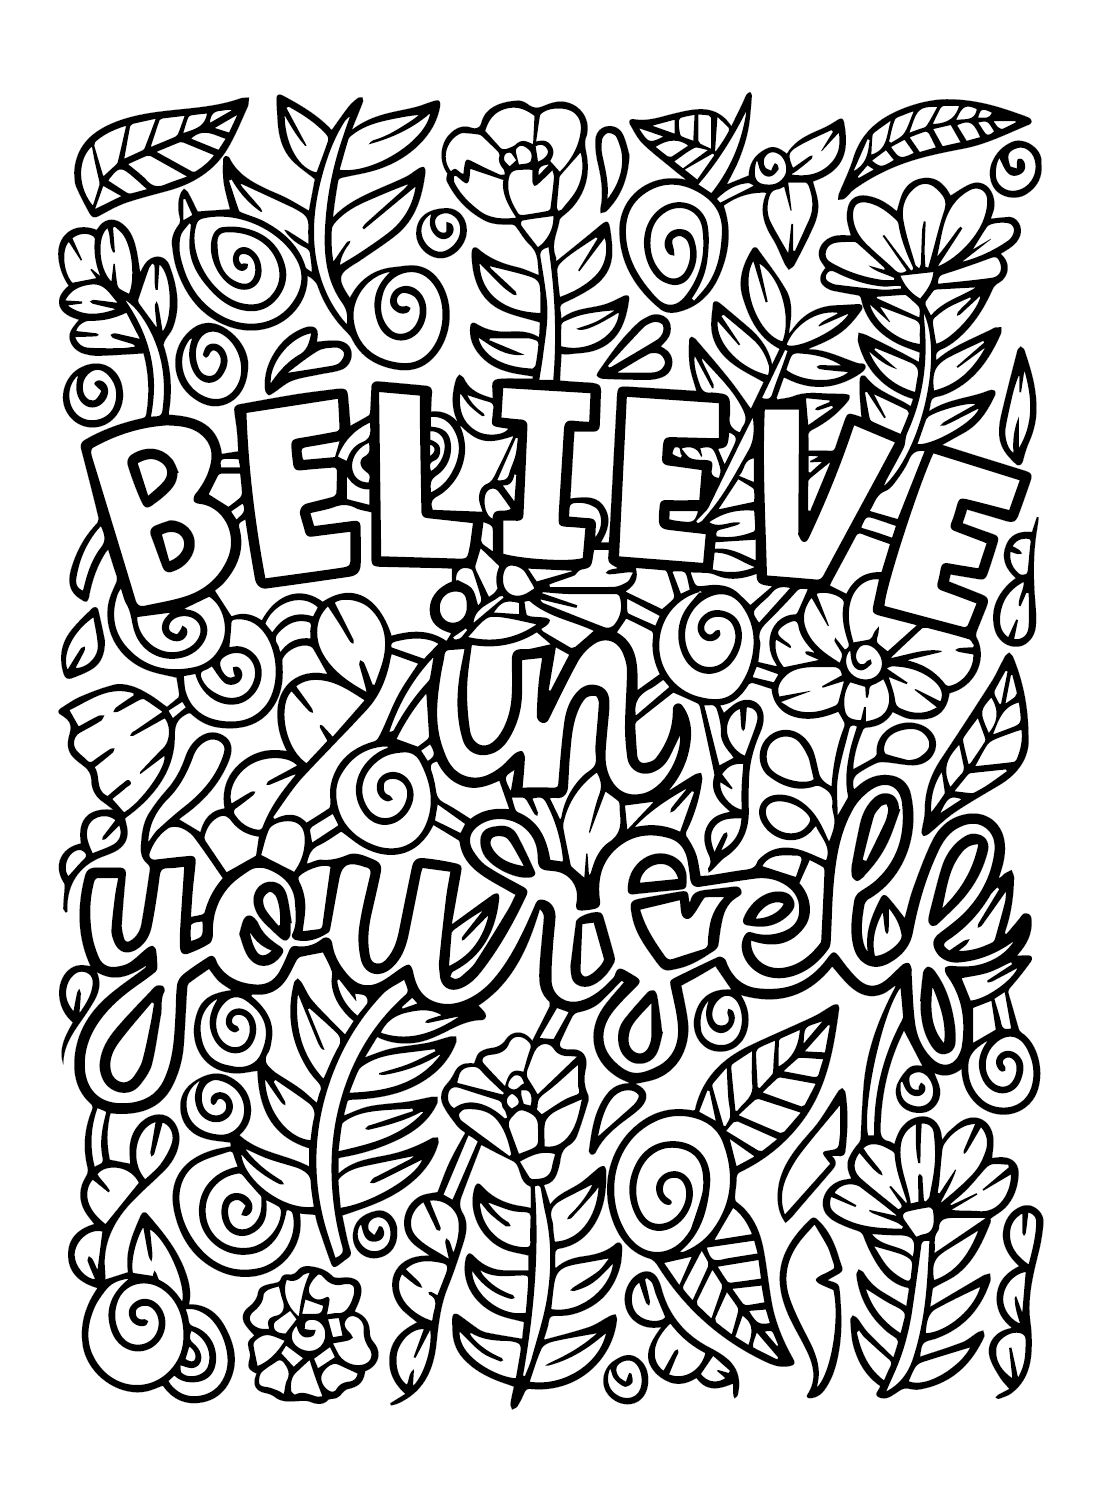 Motivational Printable Coloring Page